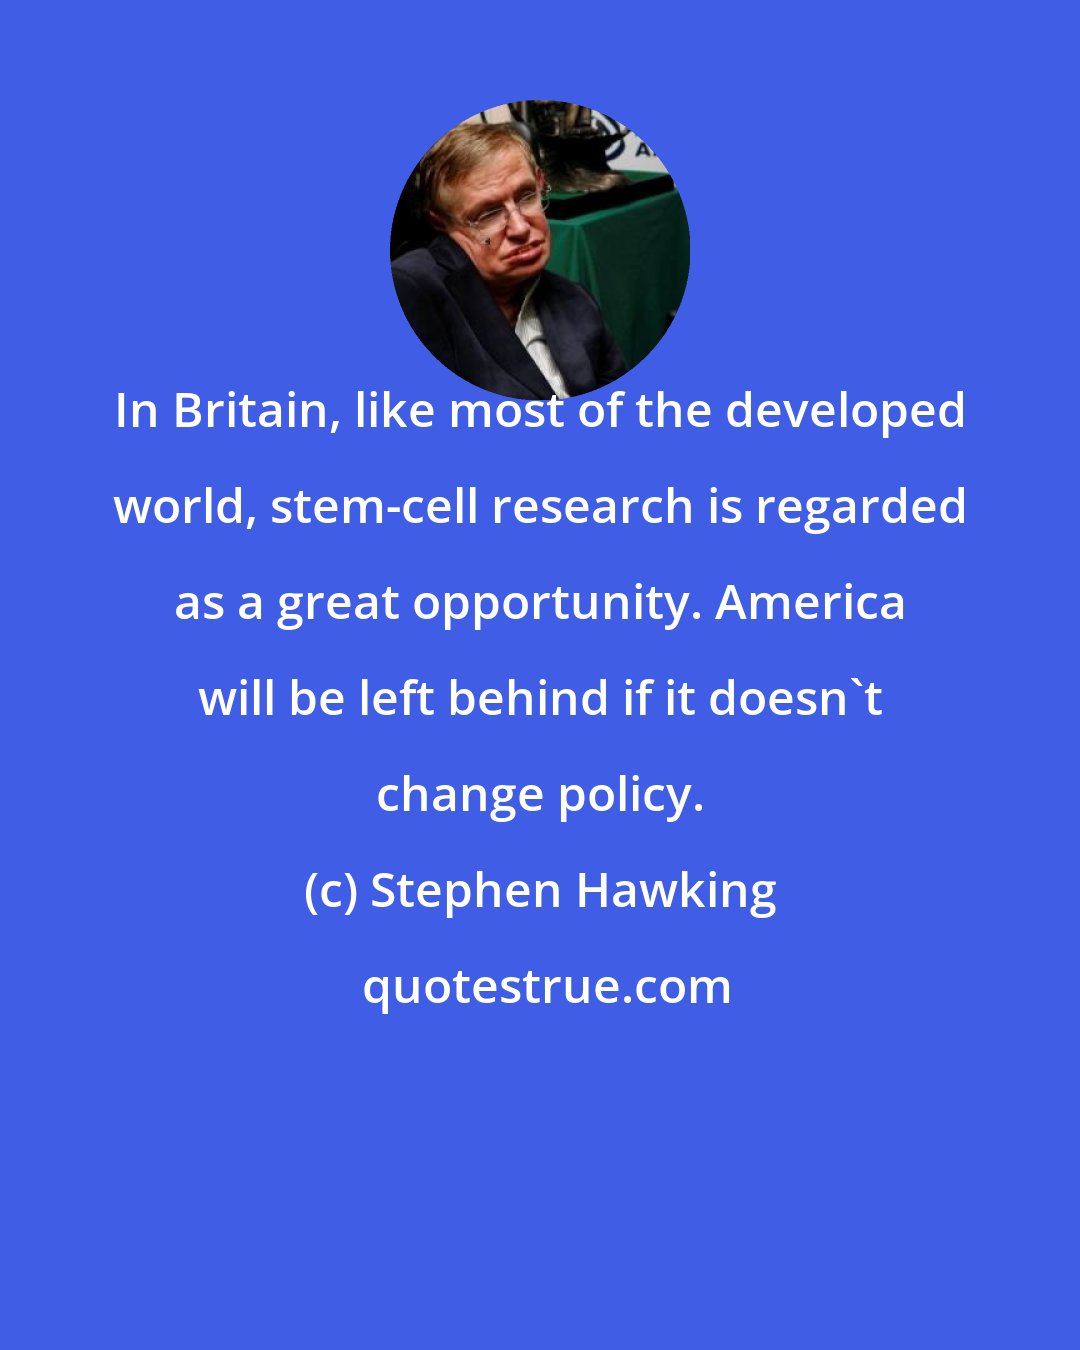 Stephen Hawking: In Britain, like most of the developed world, stem-cell research is regarded as a great opportunity. America will be left behind if it doesn't change policy.